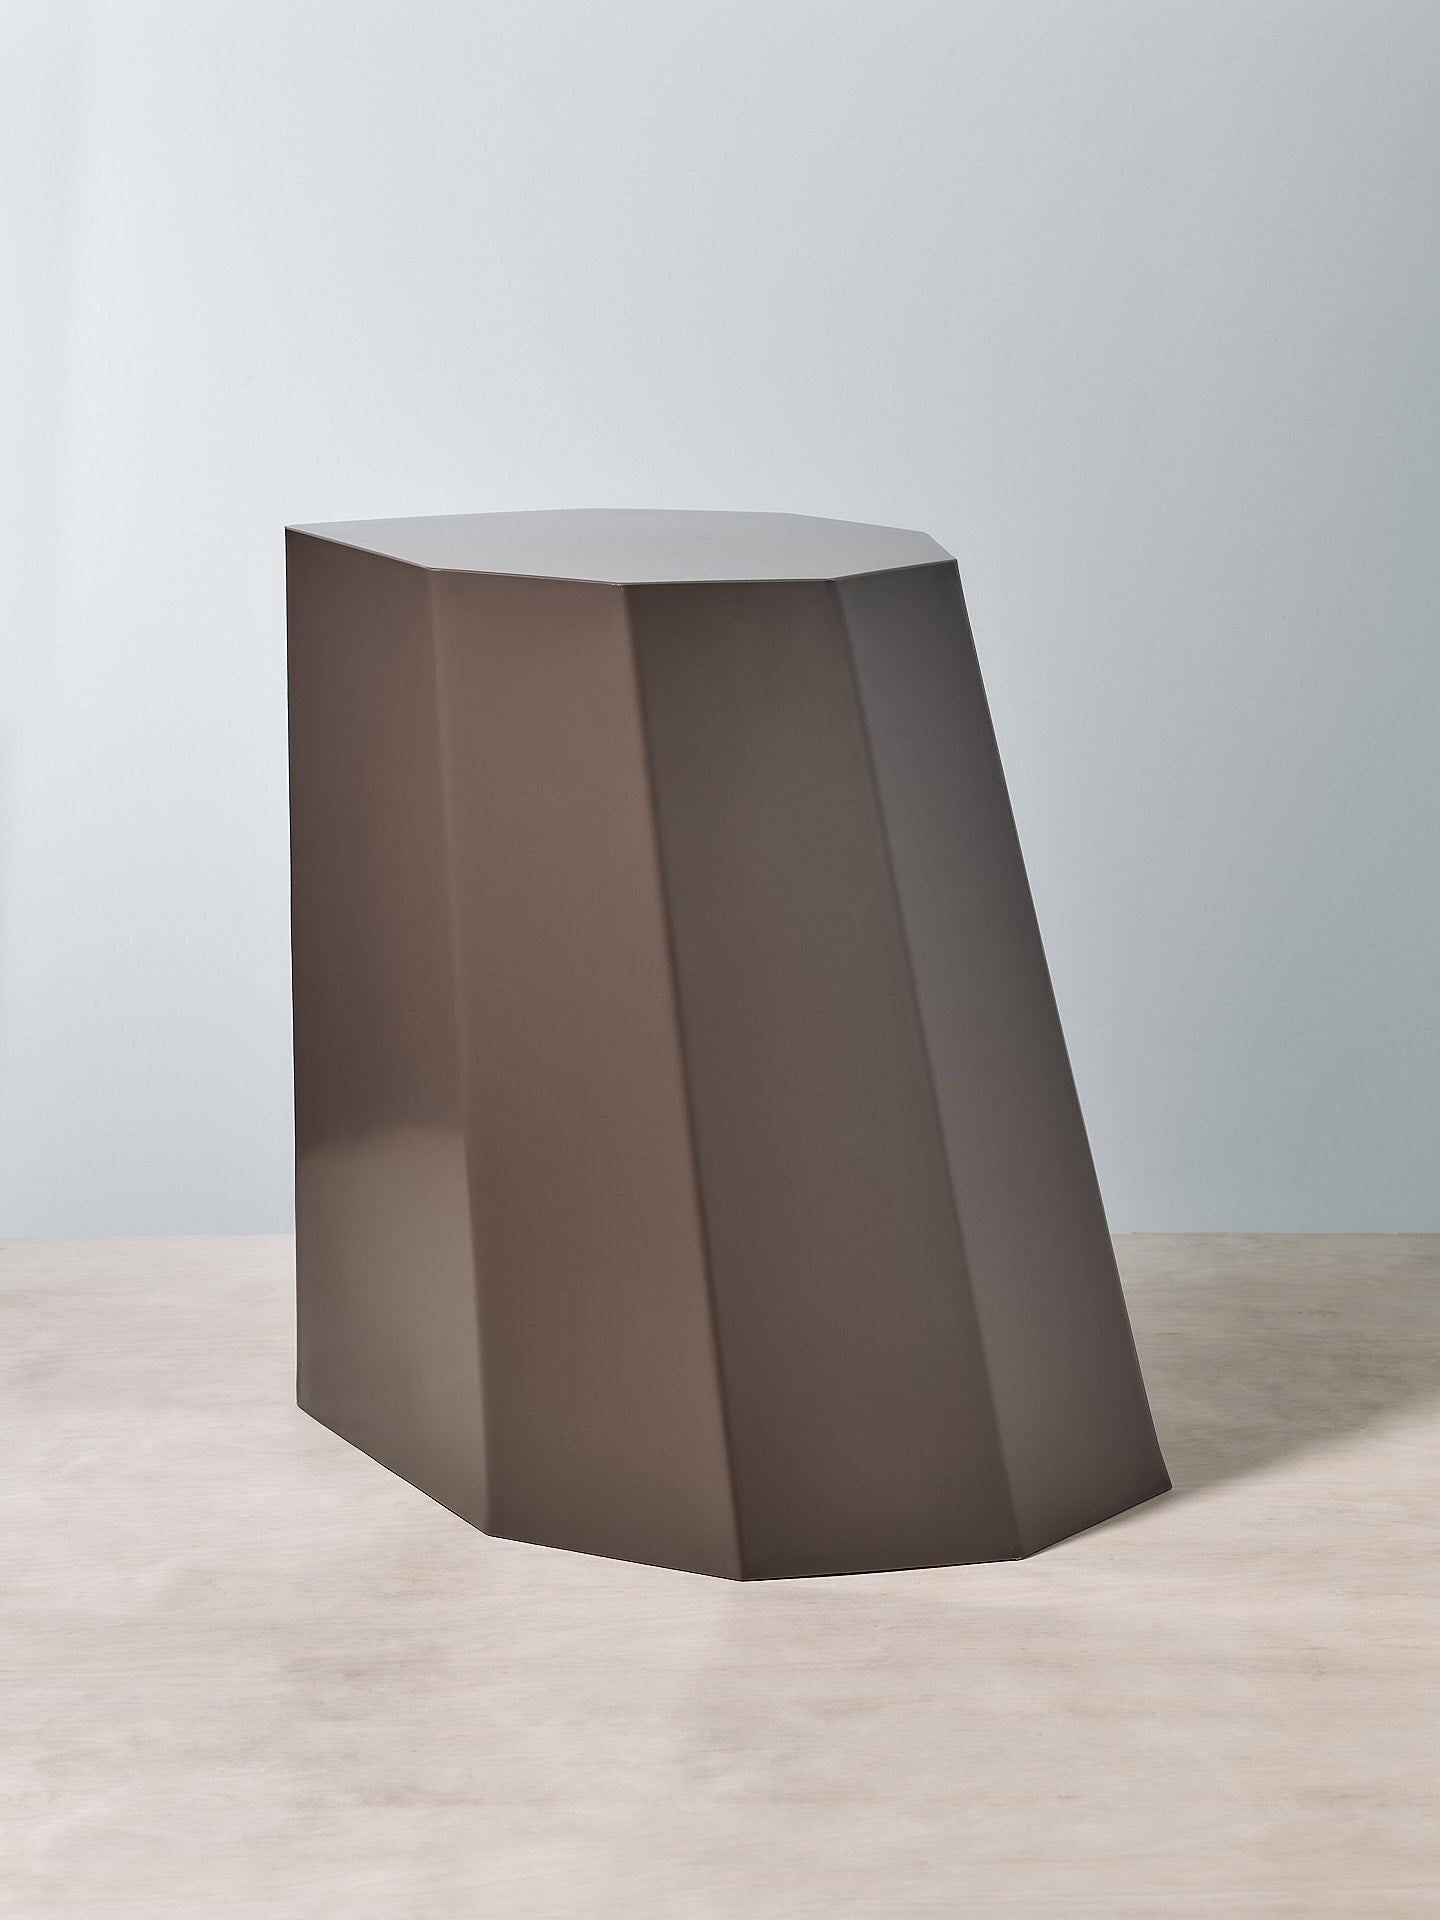 A Martino Gamper Arnold Circus Stool – Cocoa on a wooden surface.